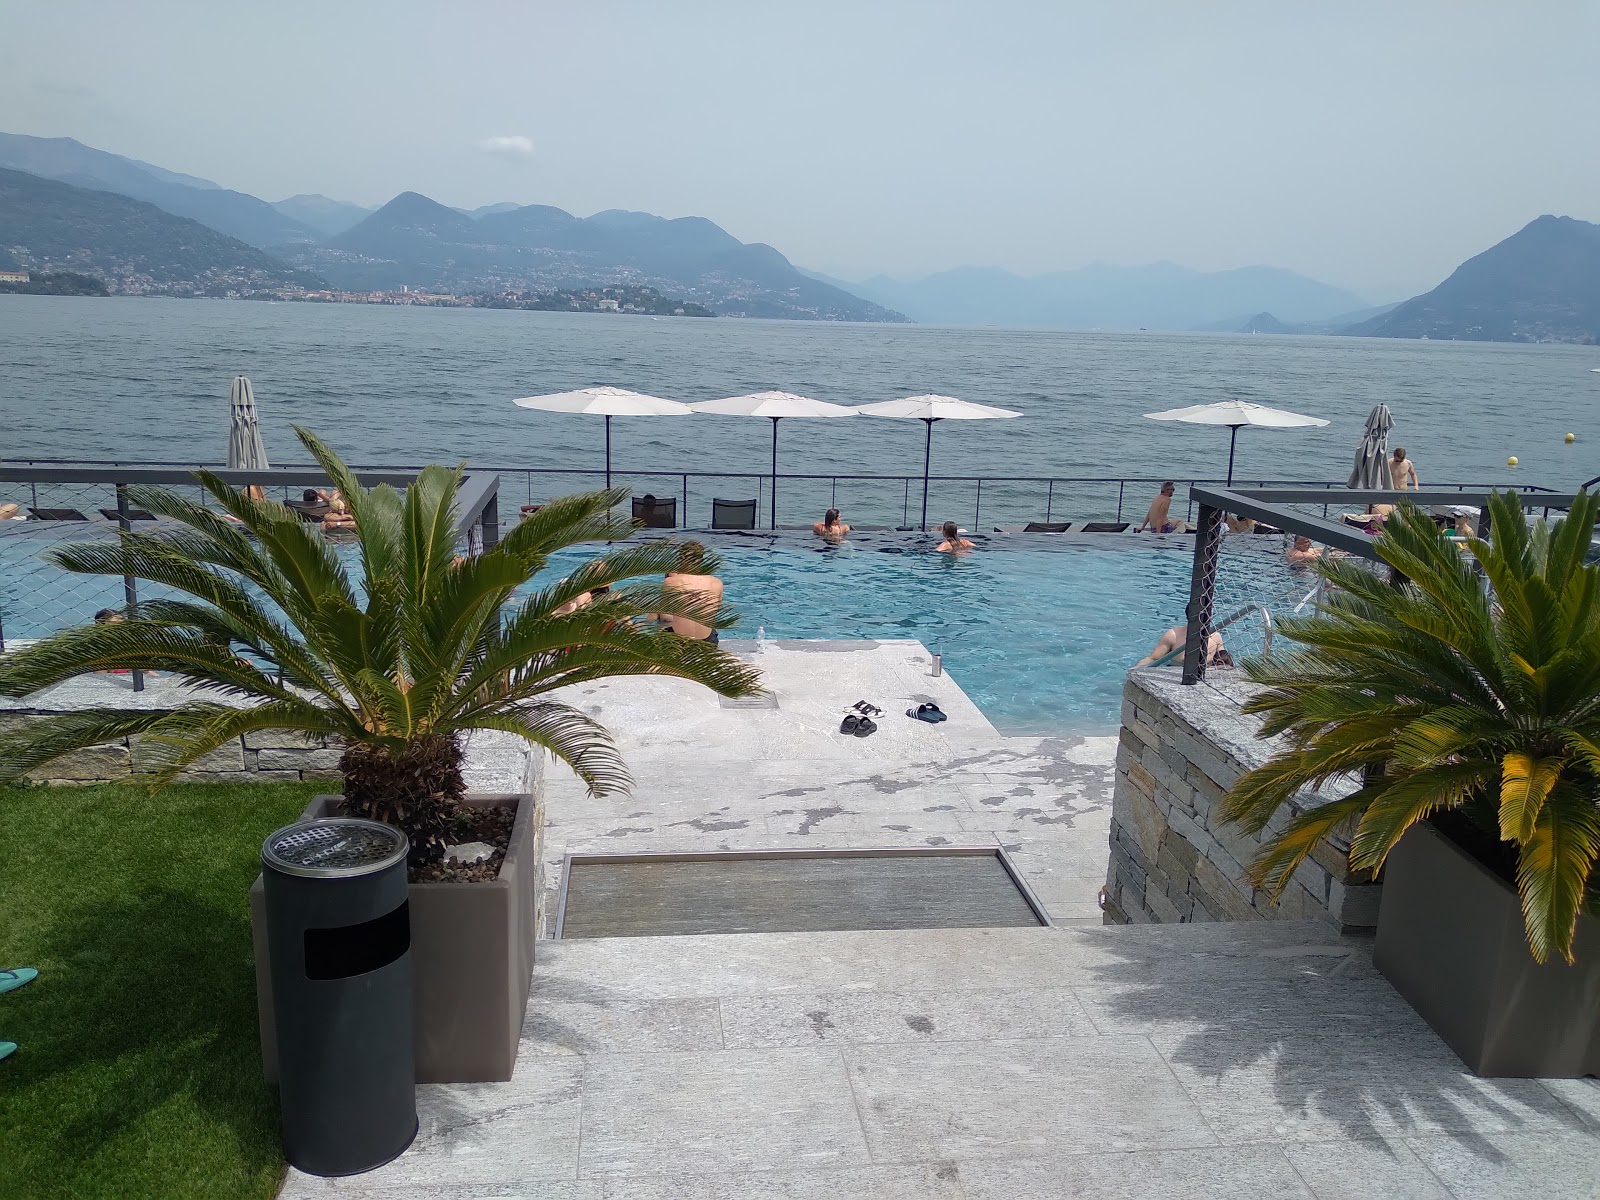 Photo of Spiaggia di Stresa with turquoise water surface